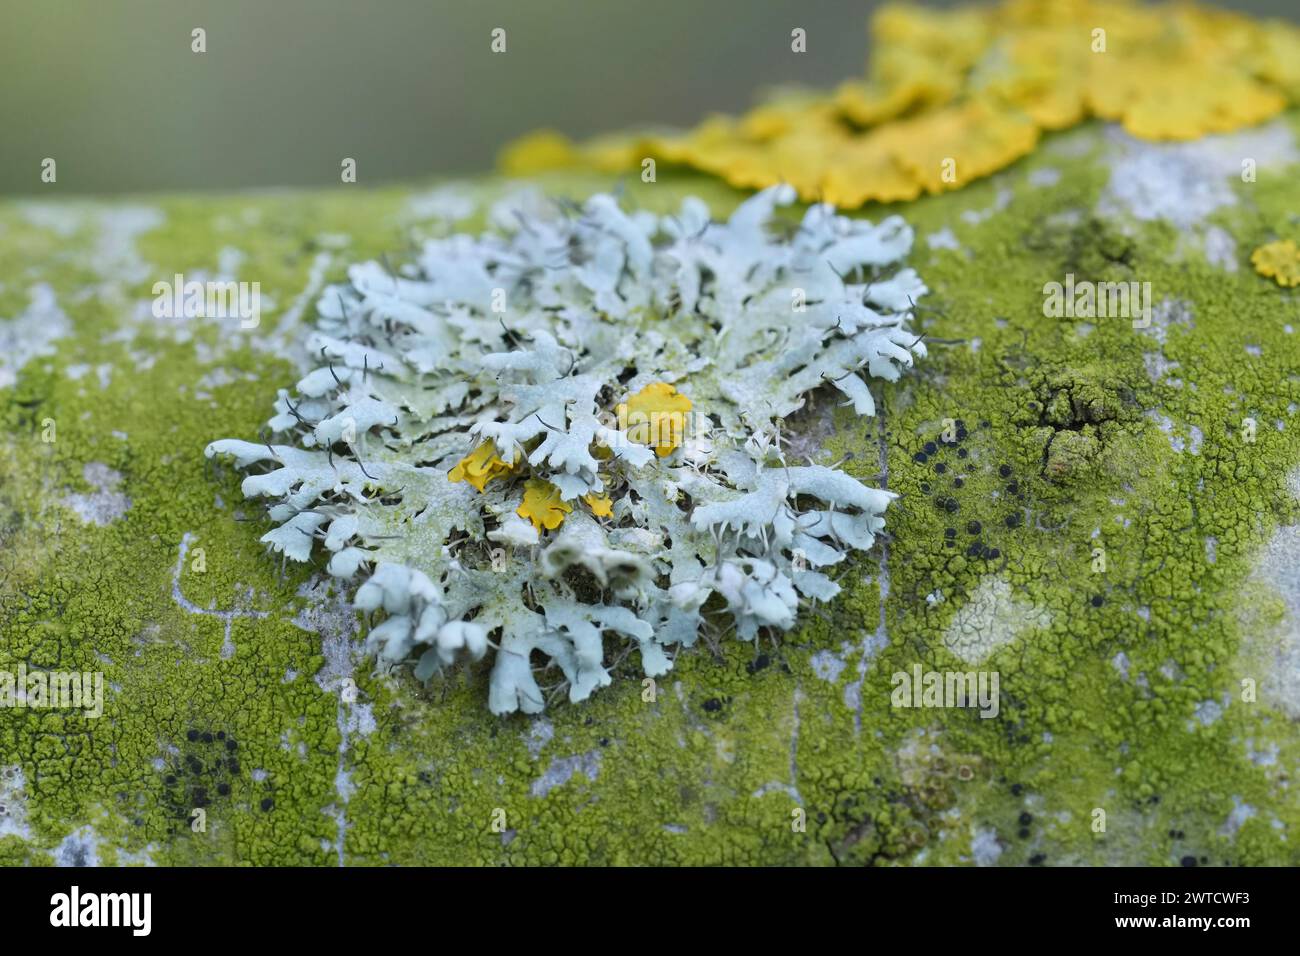 Natural closeup on a grey-colored Hooded rosette lichen, Physcia adscendens, on a branch Stock Photo